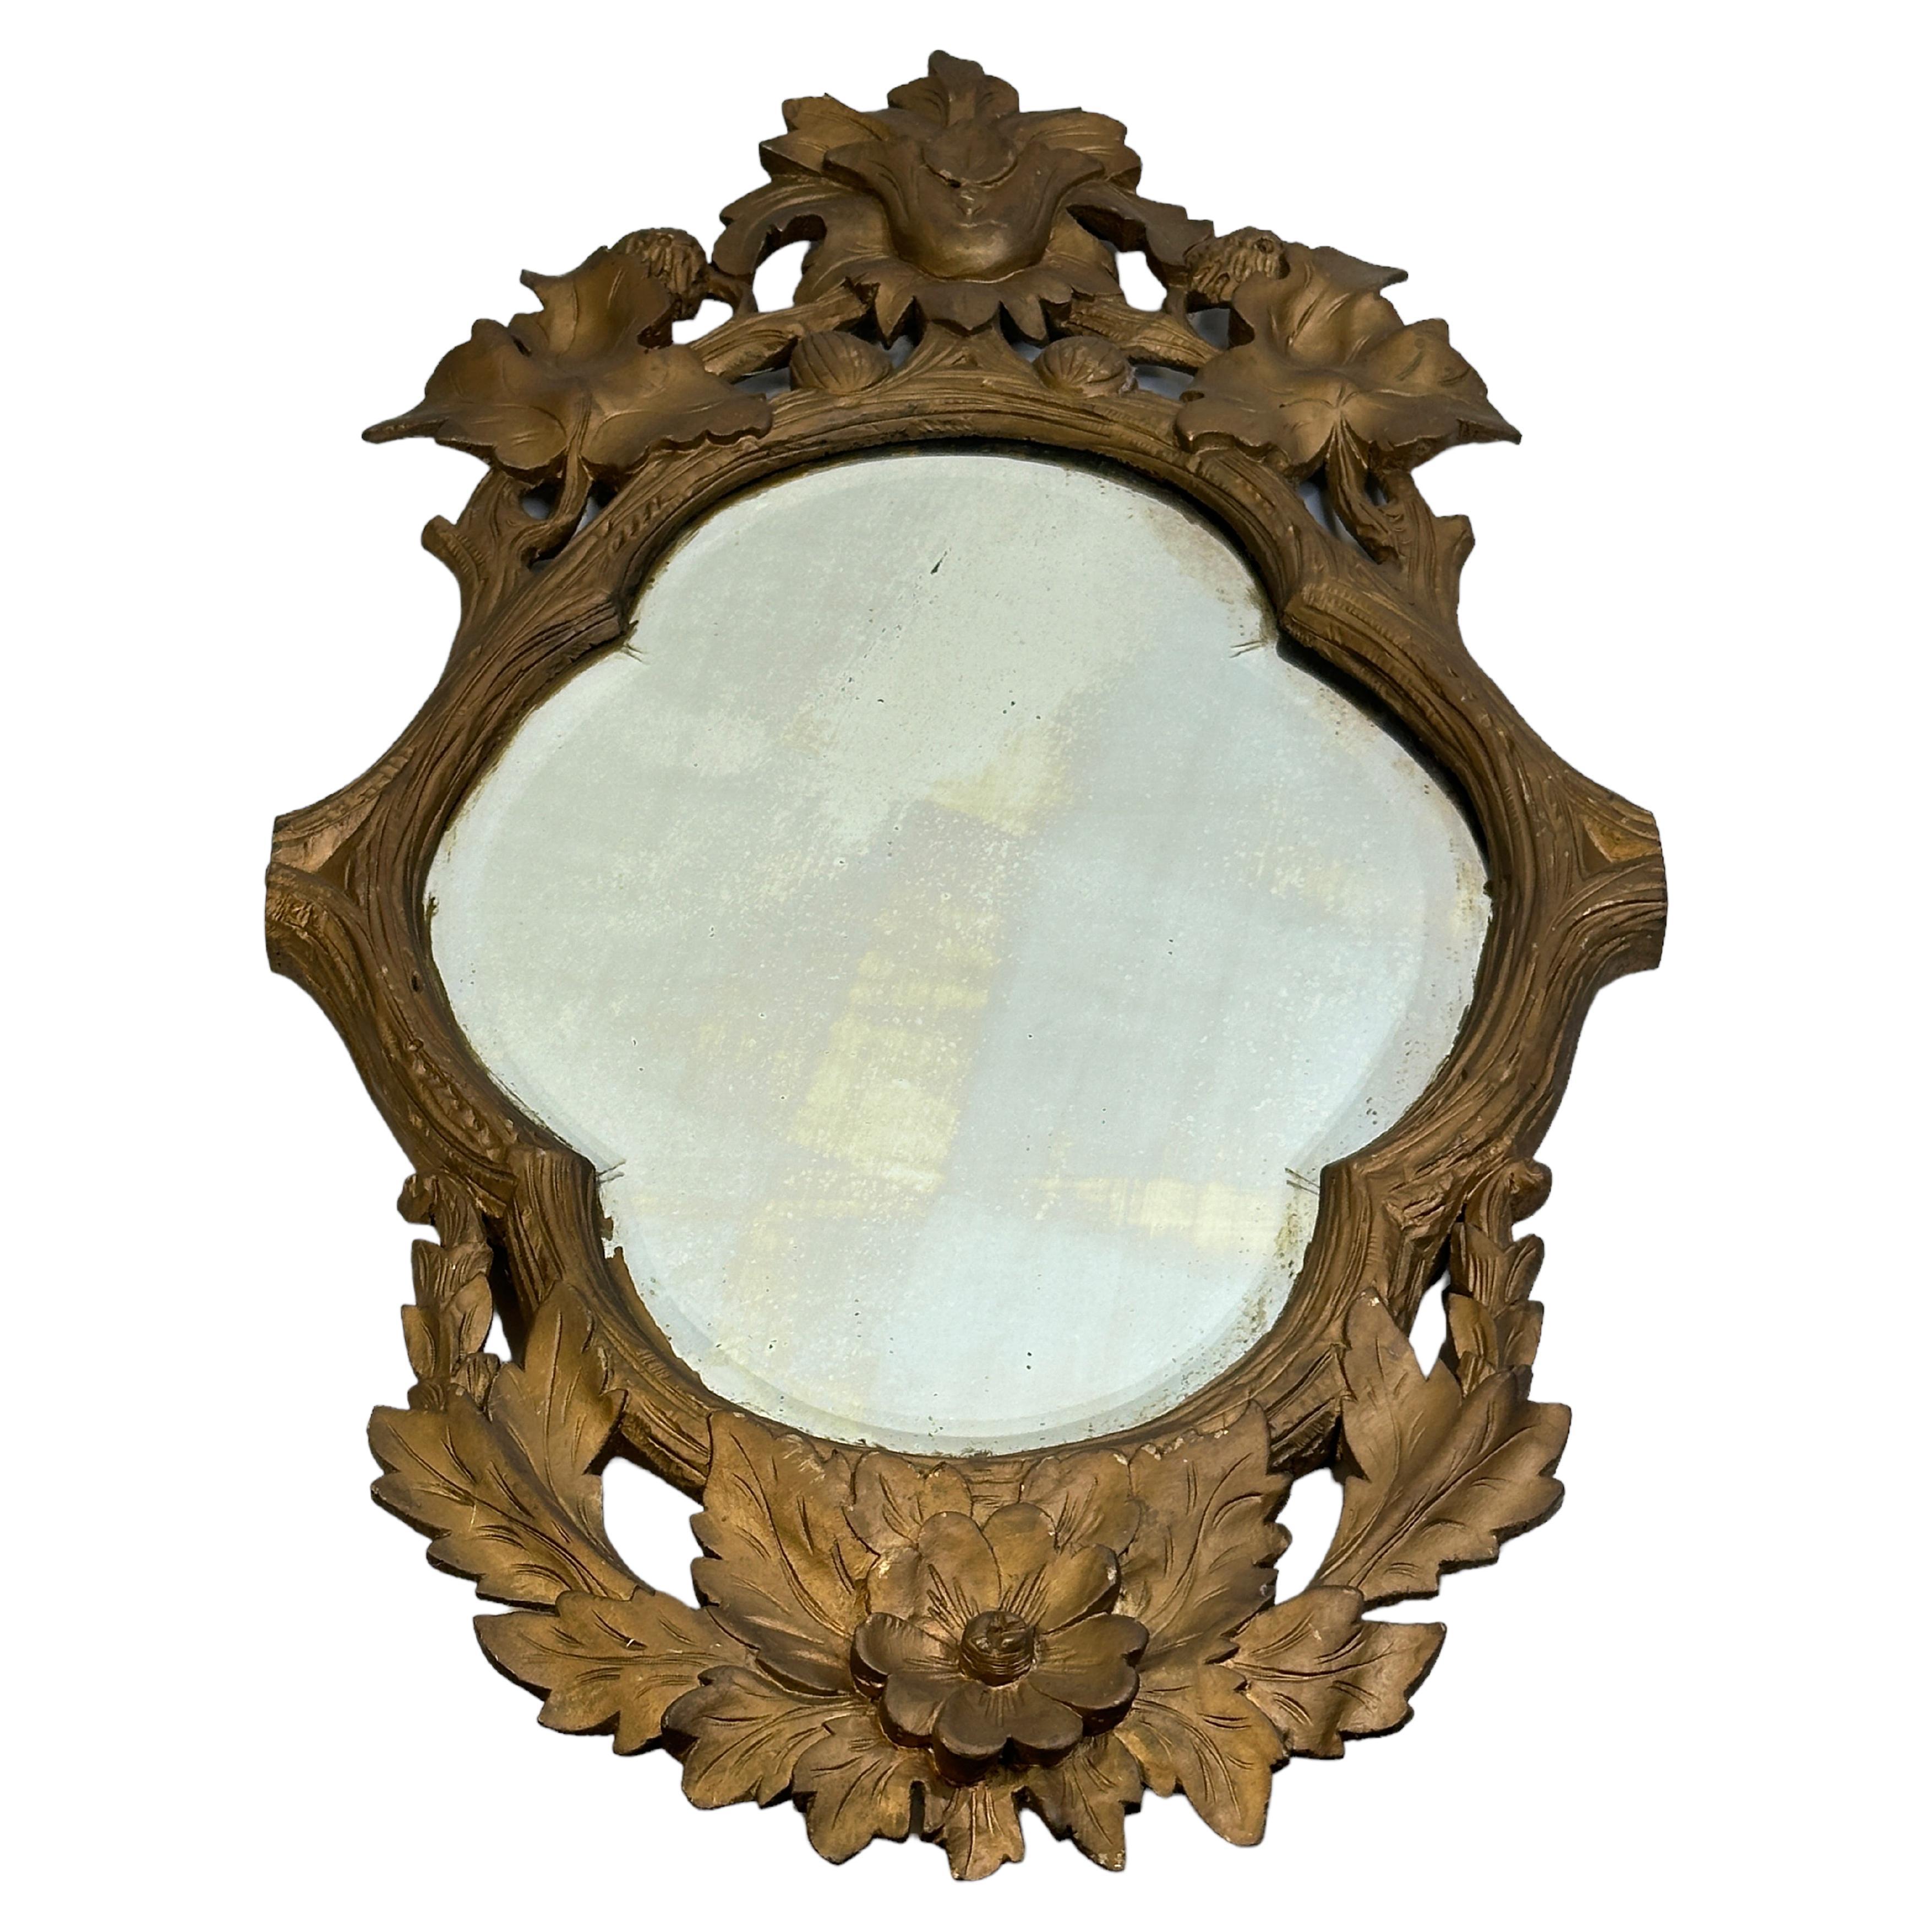 A most impressive german late 19th century gilded wood carved frame mirror circa 1890s or older. The original mirror plate is framed within an oval mottled warm gilded border. The unique and extremely decorative frame displays natural wood and